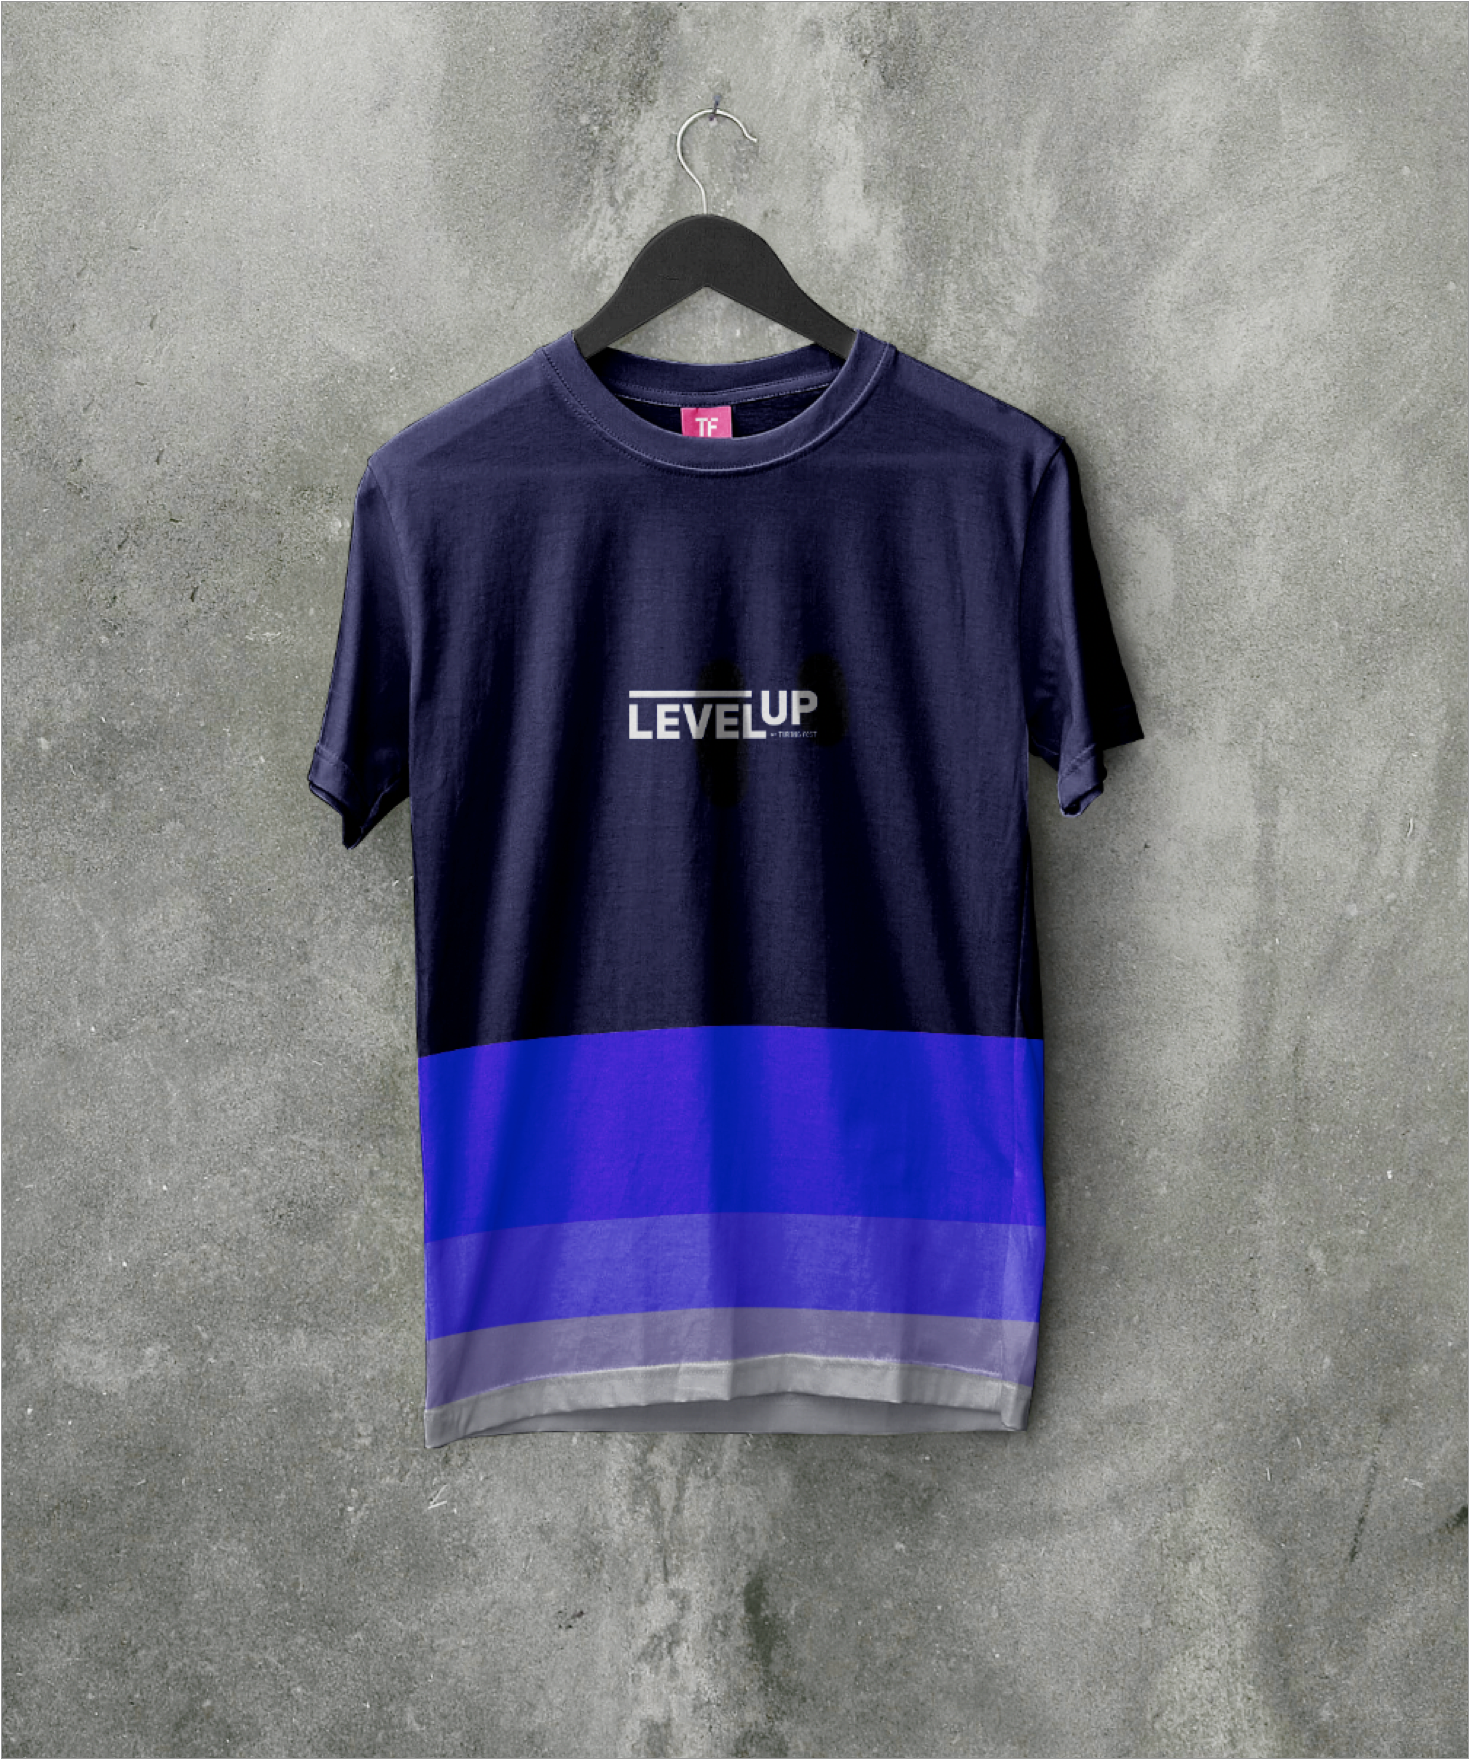 An example of promotional swag; a ‘Level Up’ t-shirt in with horizontal stripes in shades of purple